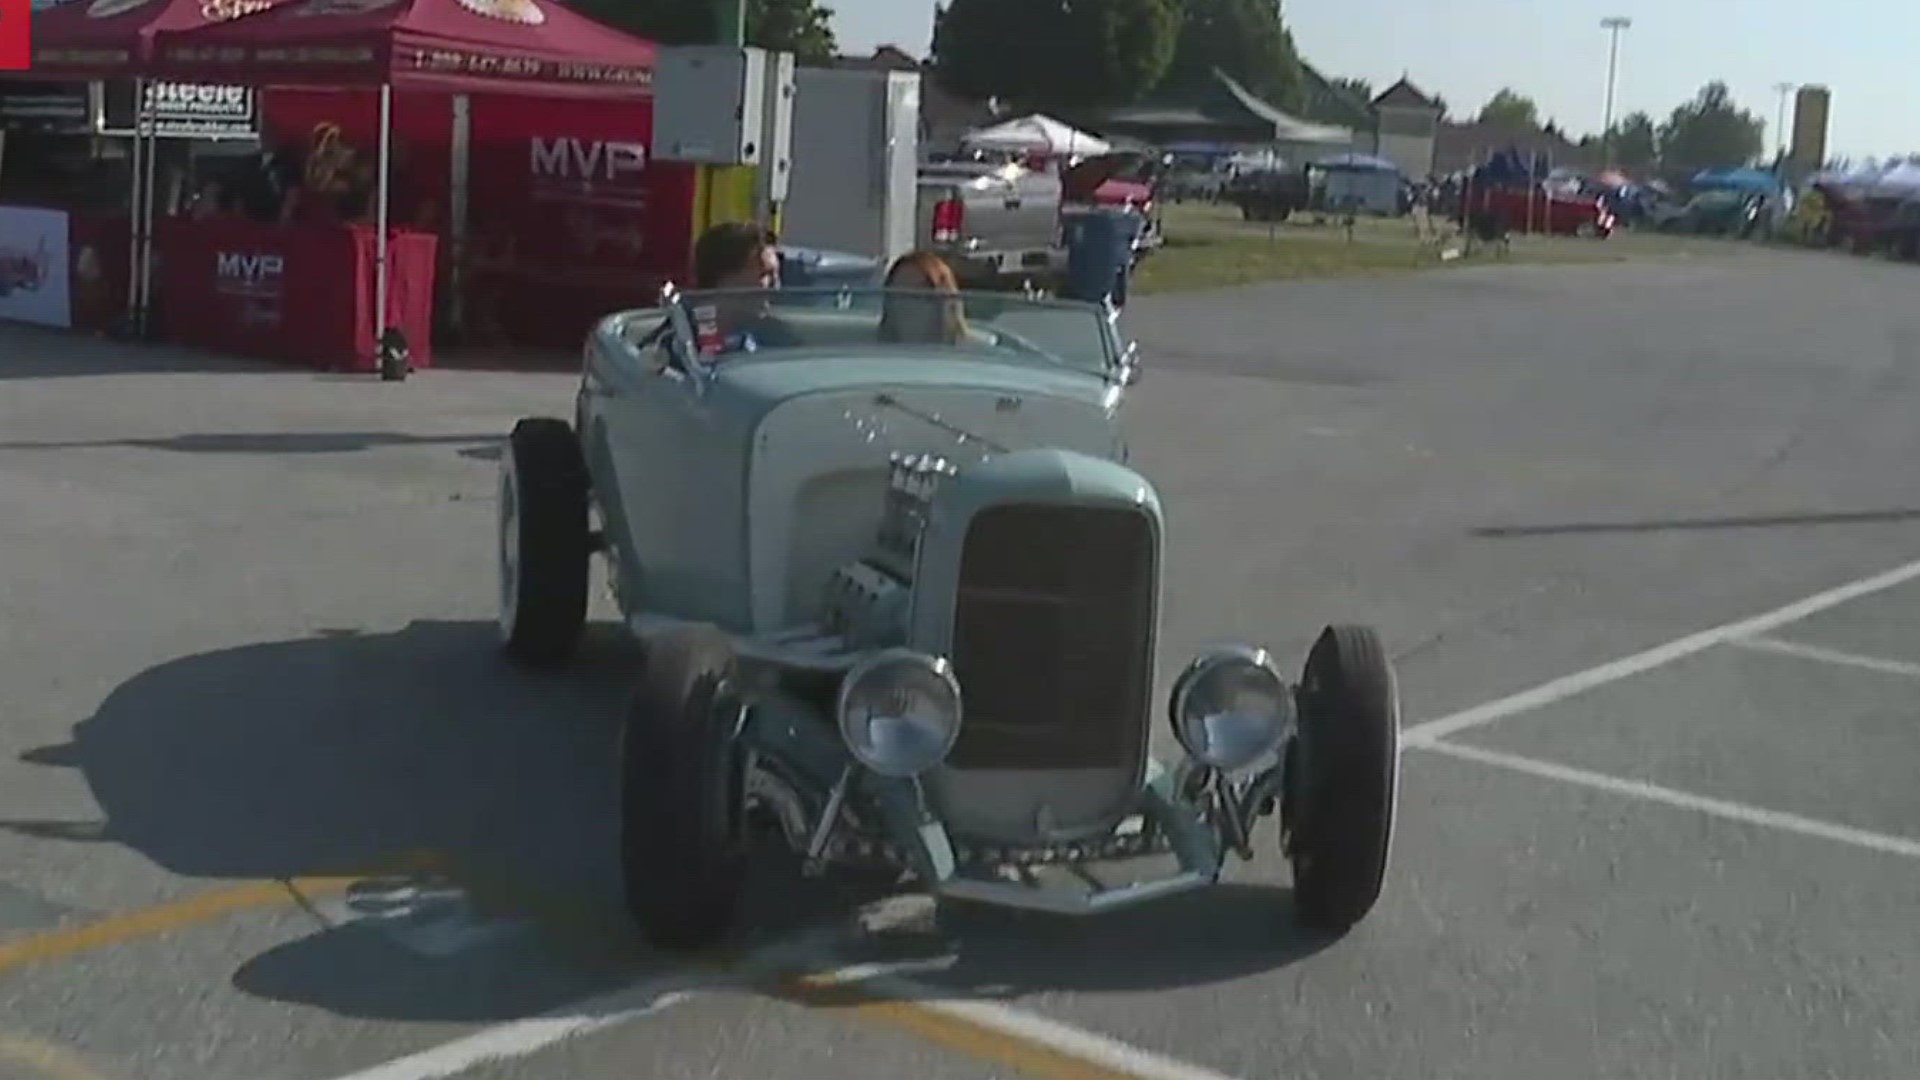 More than 3,500 classic and custom cars will be parked at the York State Fairgrounds over the weekend.